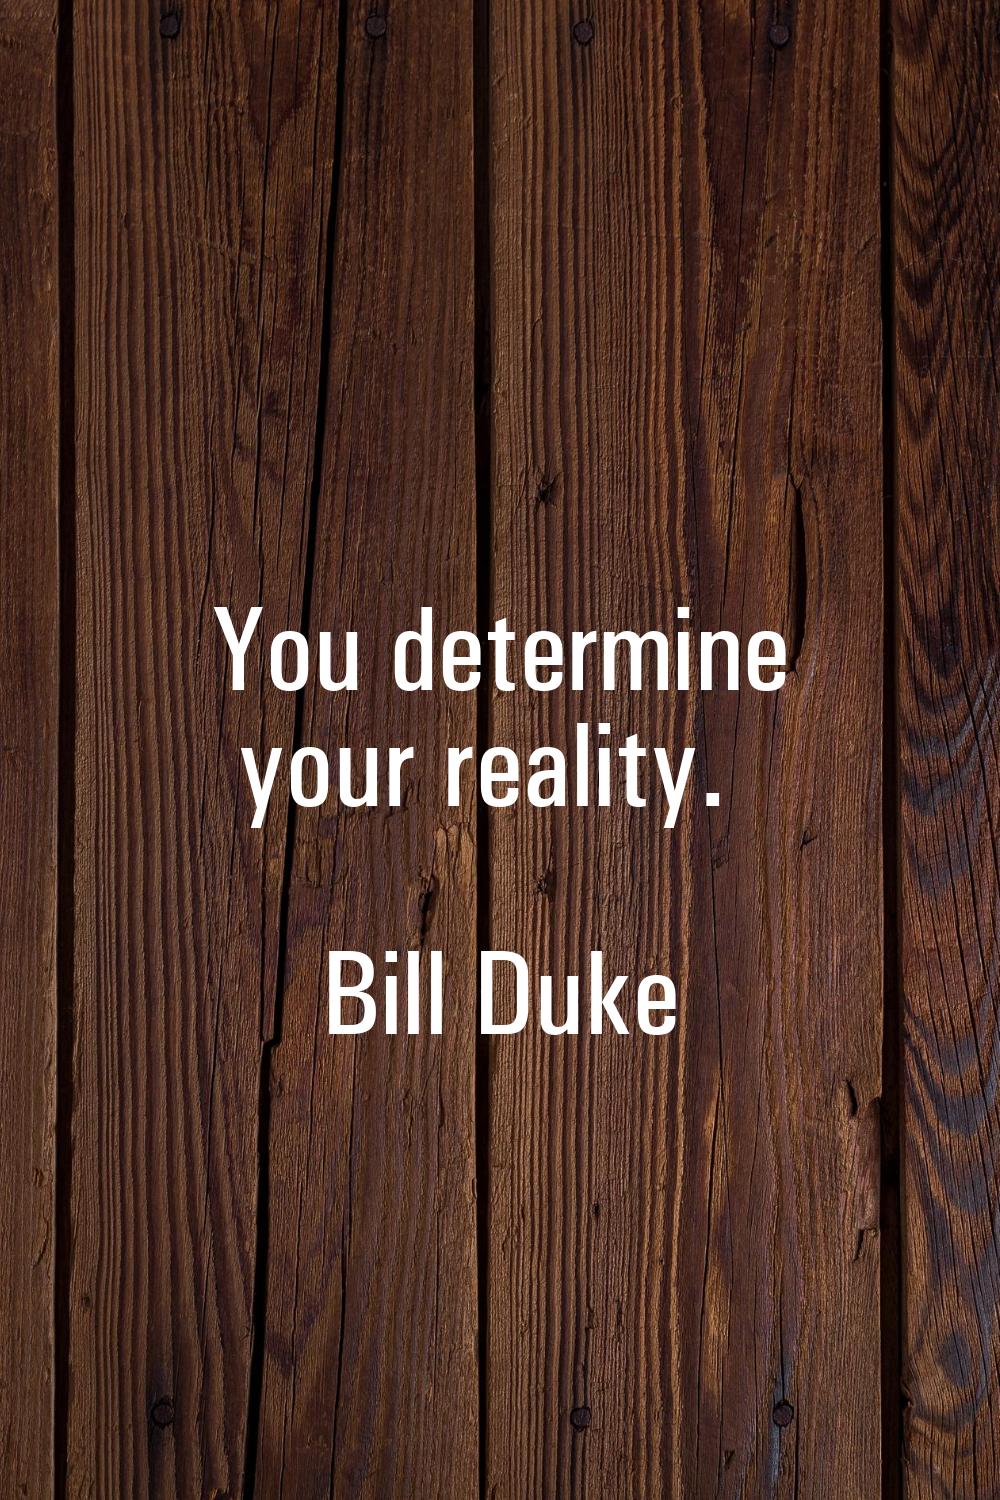 You determine your reality.